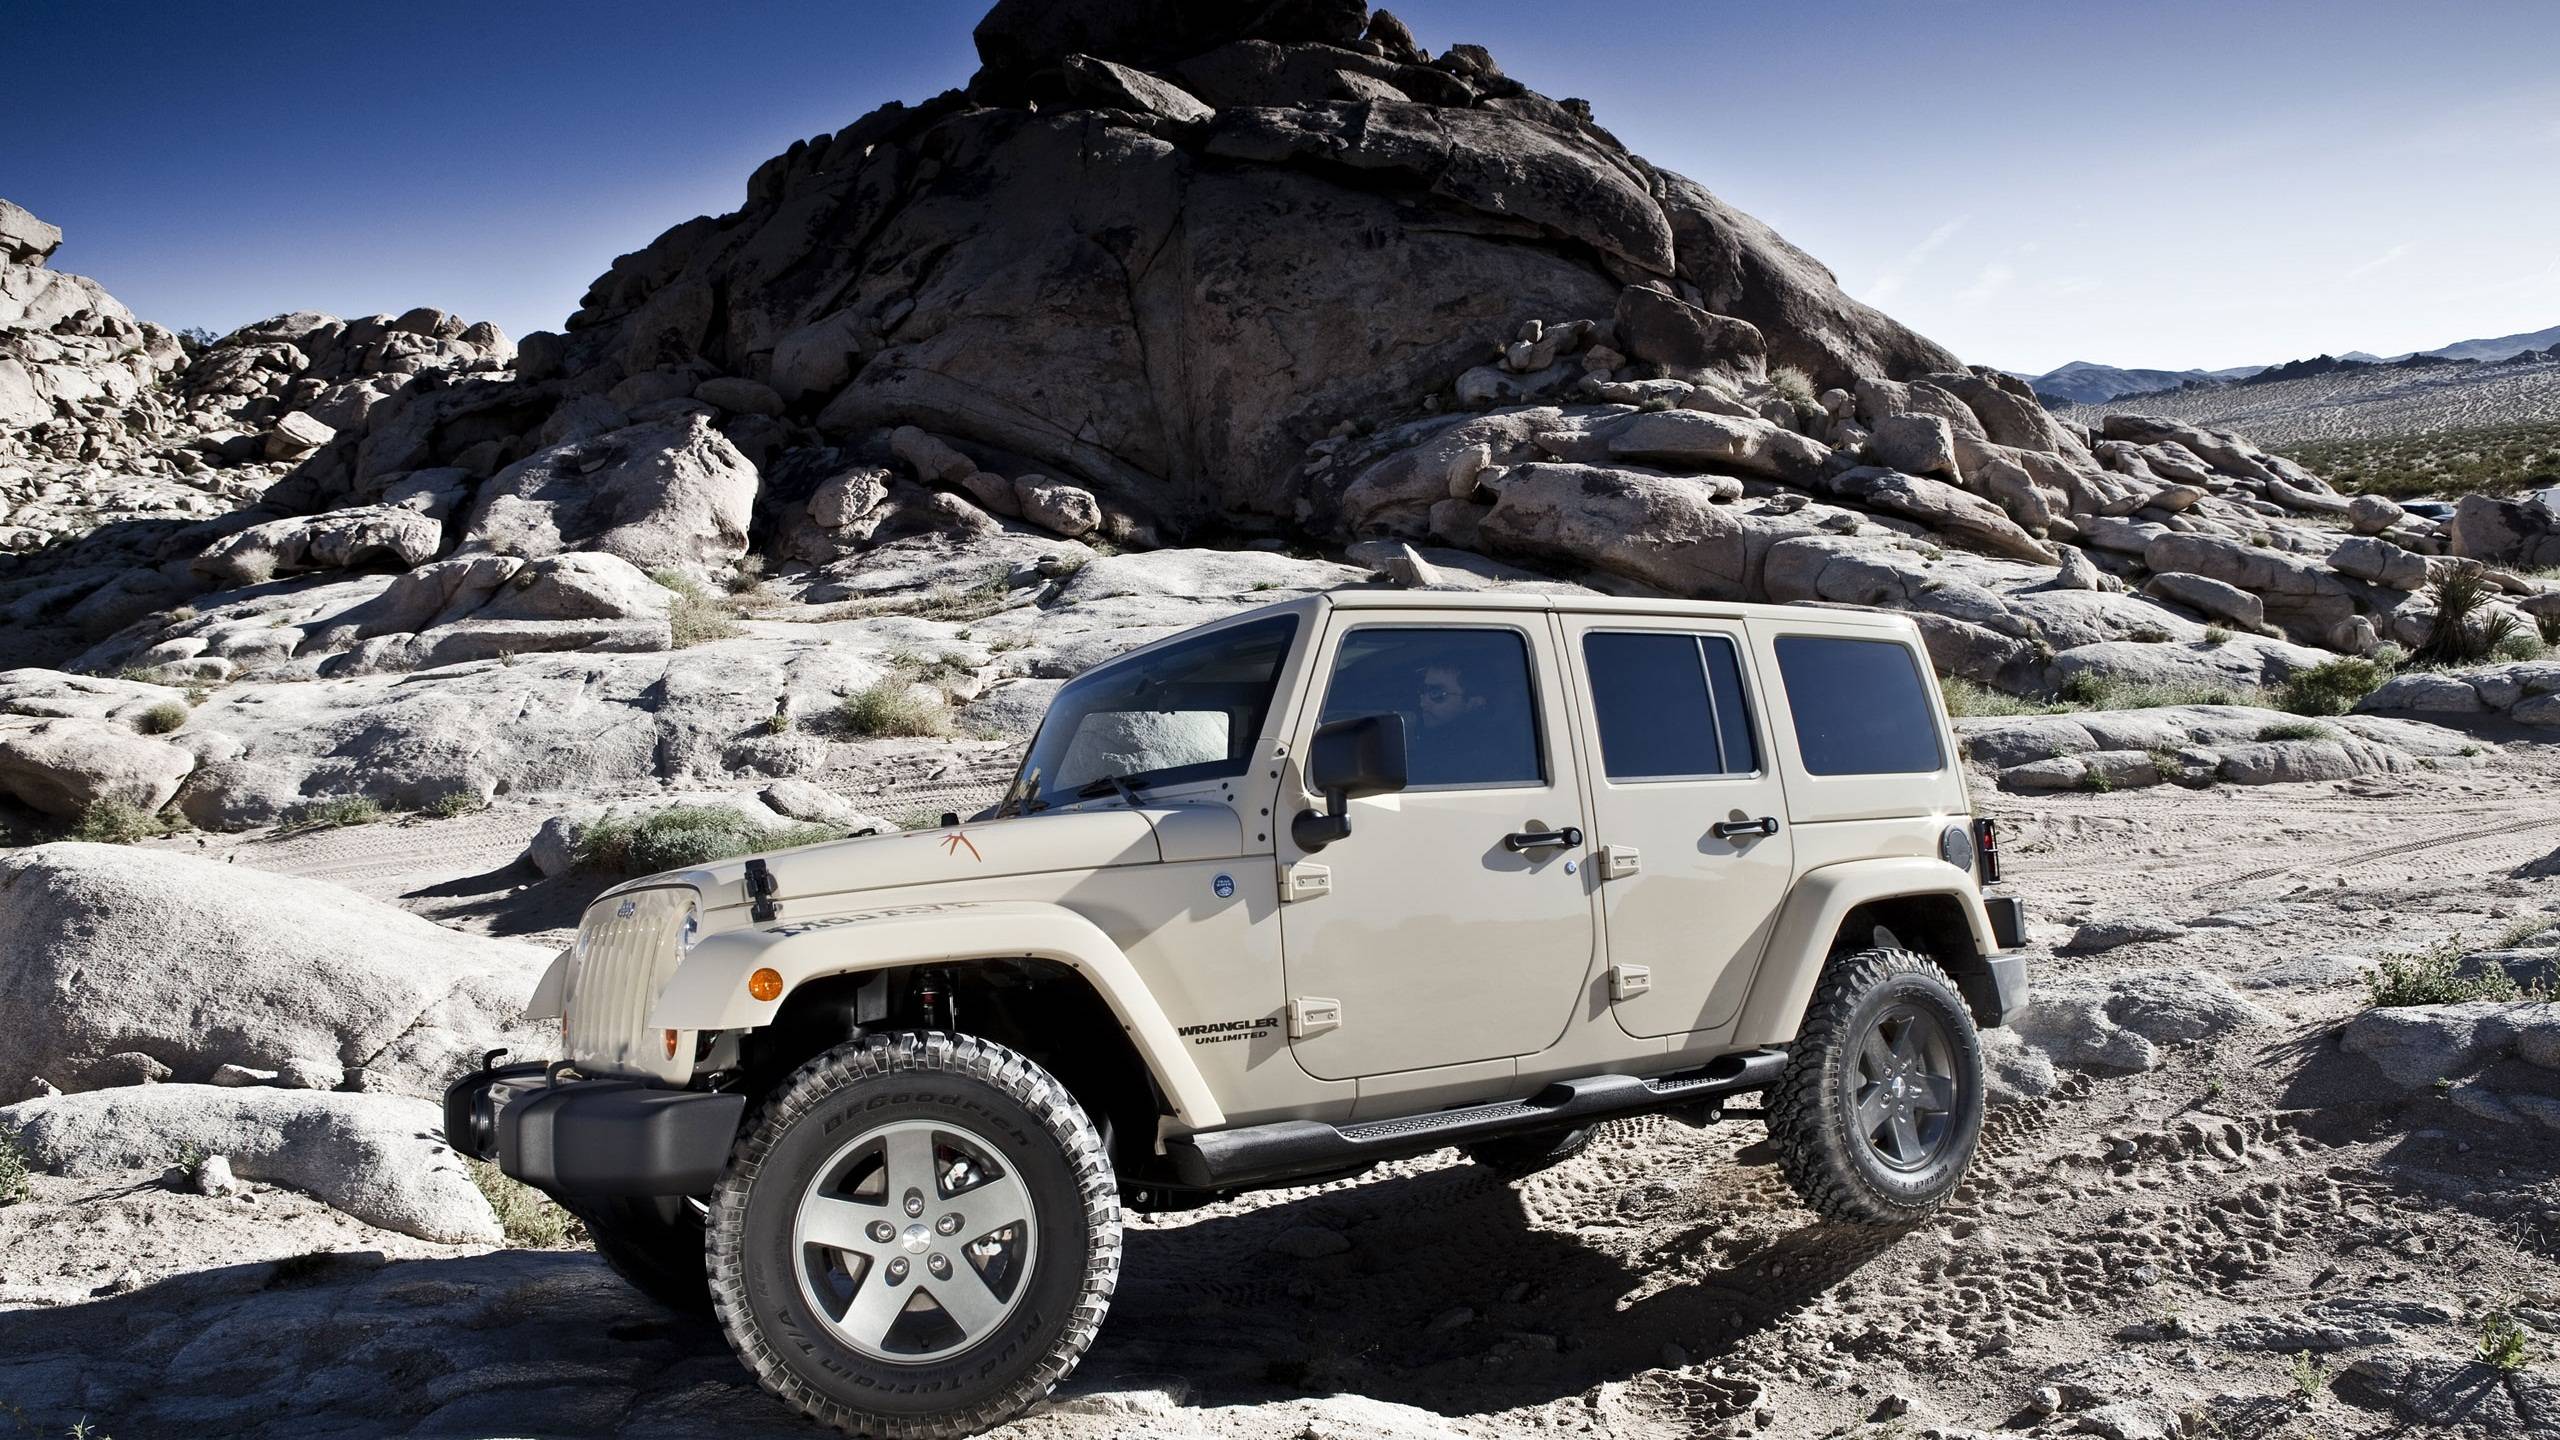 Jeep Wallpaper. Jeep Wallpaper, Jeep Logo Wallpaper and Jeep Wallpaper OS X